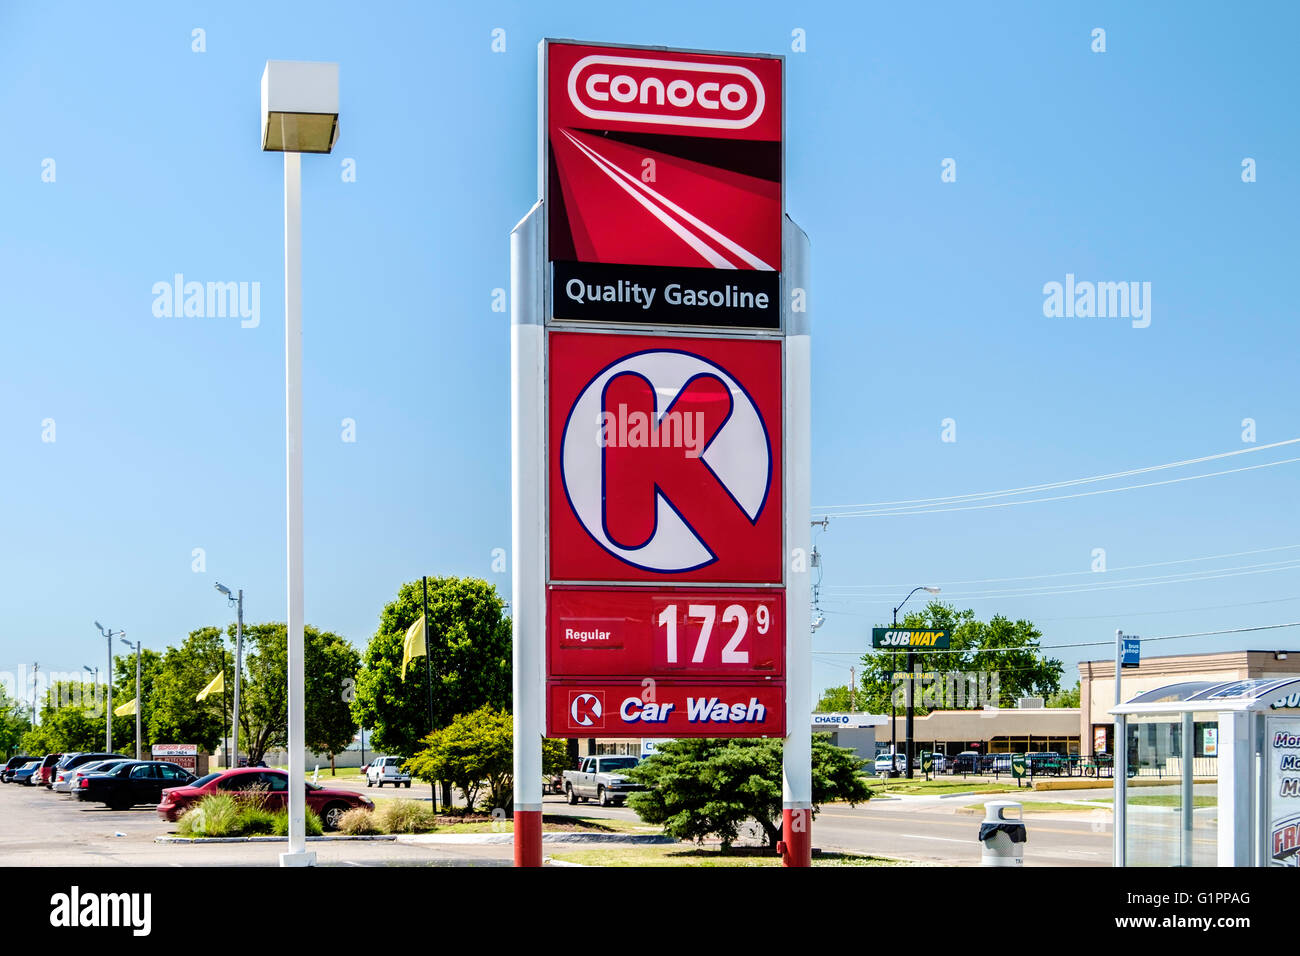 A pole sign advertising Conoco's Circle K gasoline station and convenience store. Stock Photo